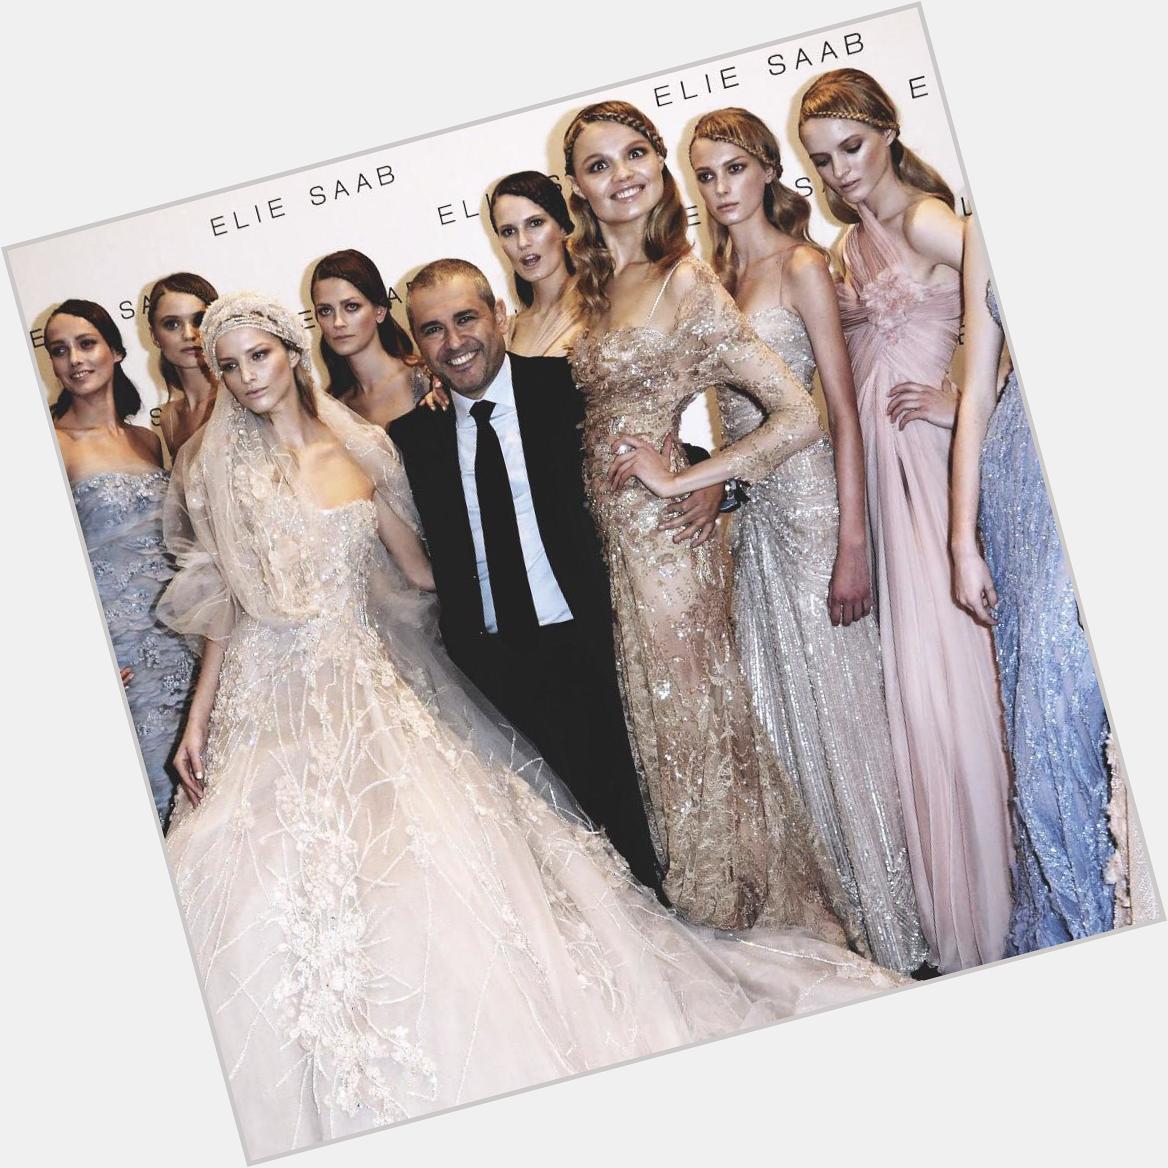   Happy Birthday, Elie Saab. Elegant women are women of character with confidence. 